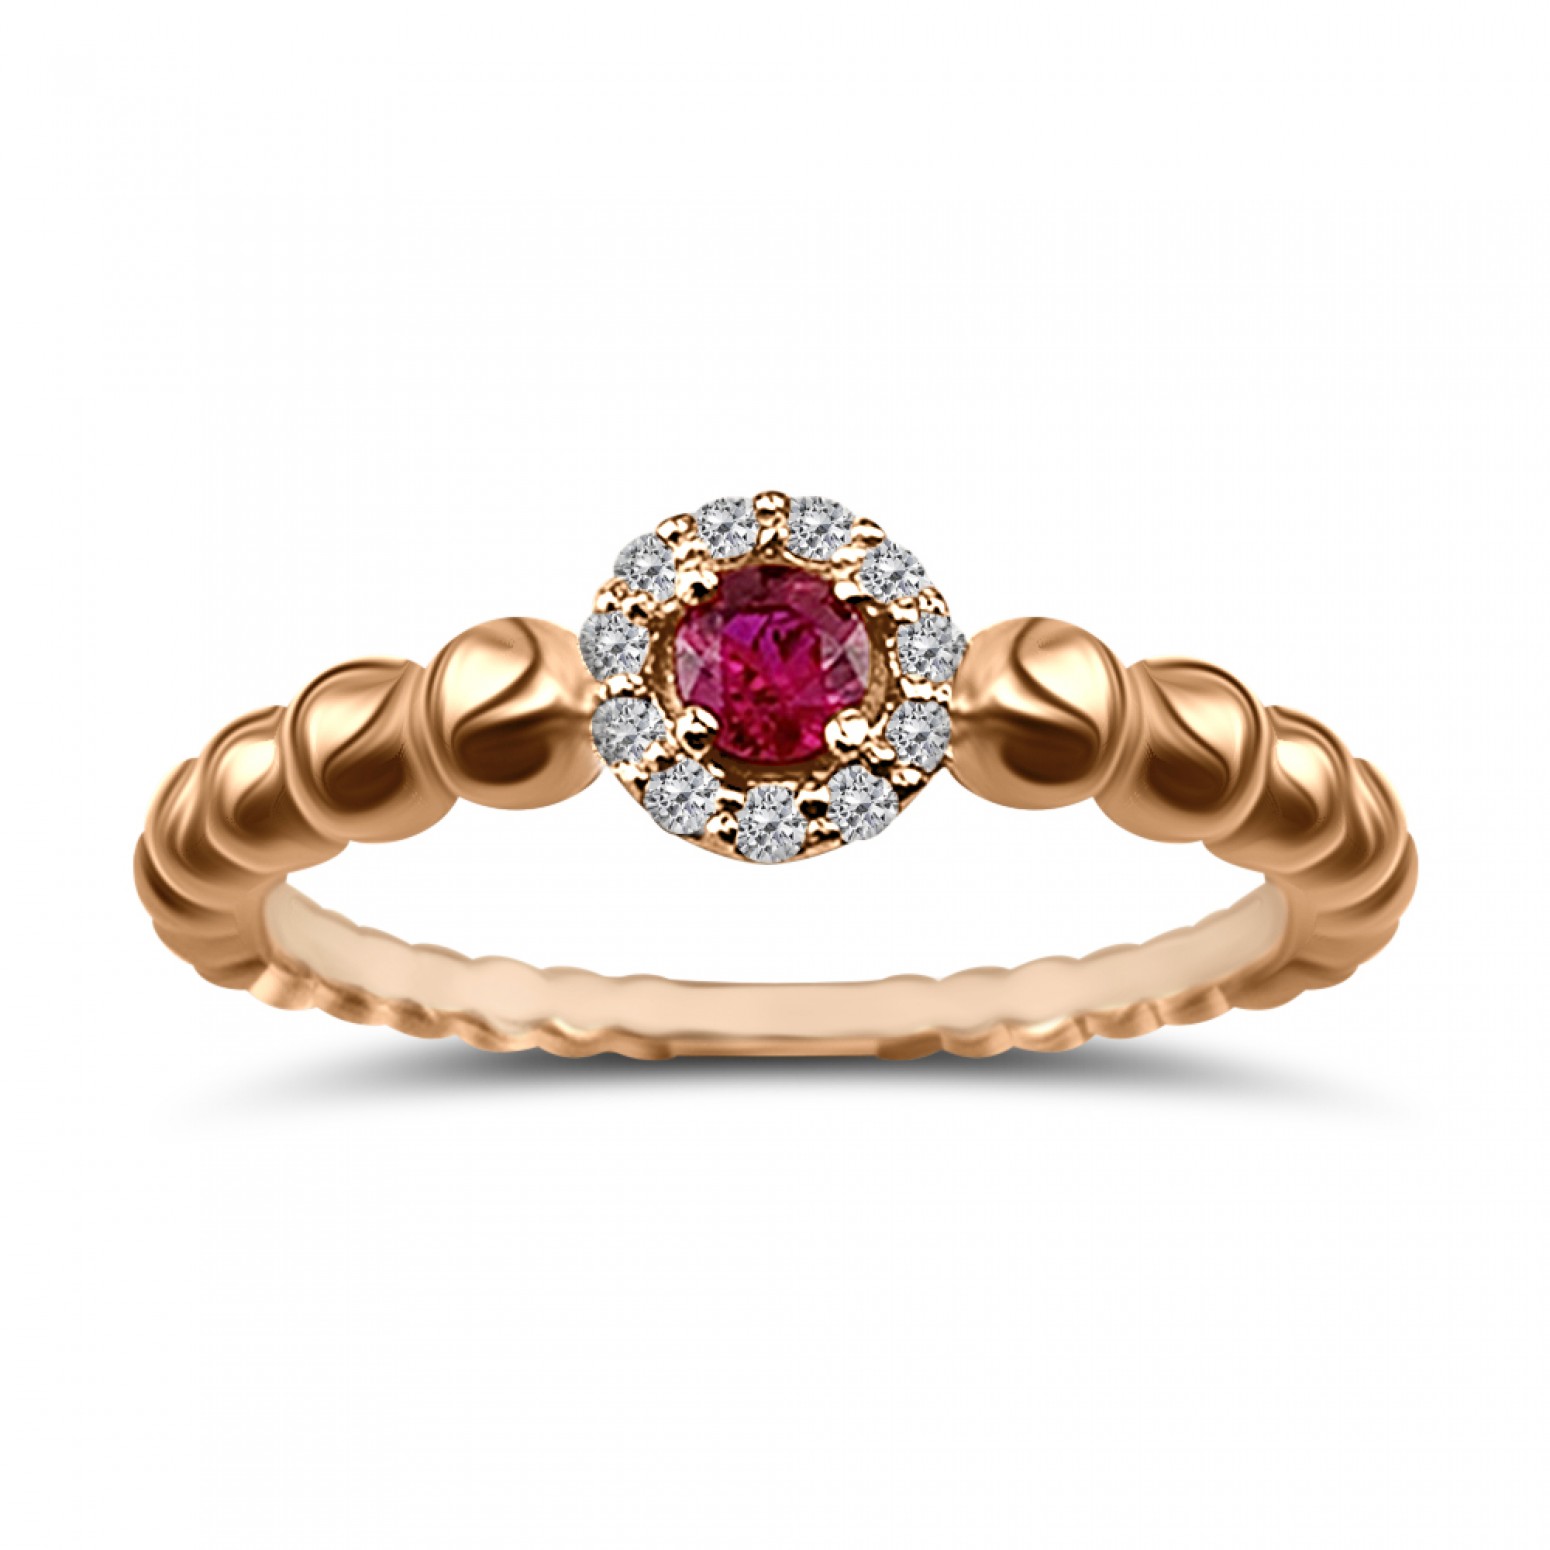 Solitaire ring 18K pink gold with ruby 0.10ct and diamonds VS1, G da3684 ENGAGEMENT RINGS Κοσμηματα - chrilia.gr